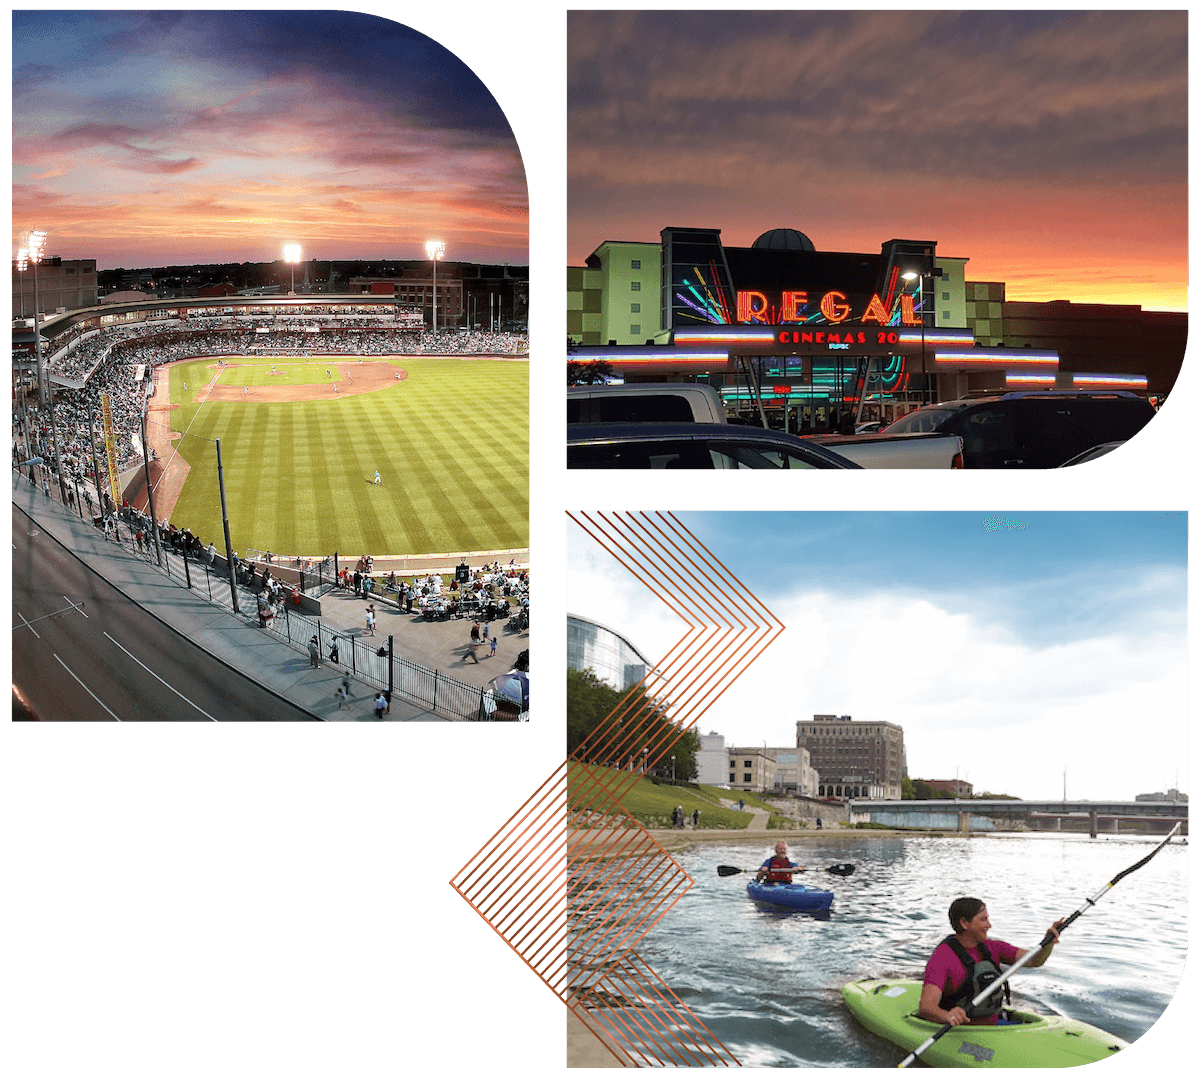 Three images showing a baseball field,a movie theater and two people boating down the river.